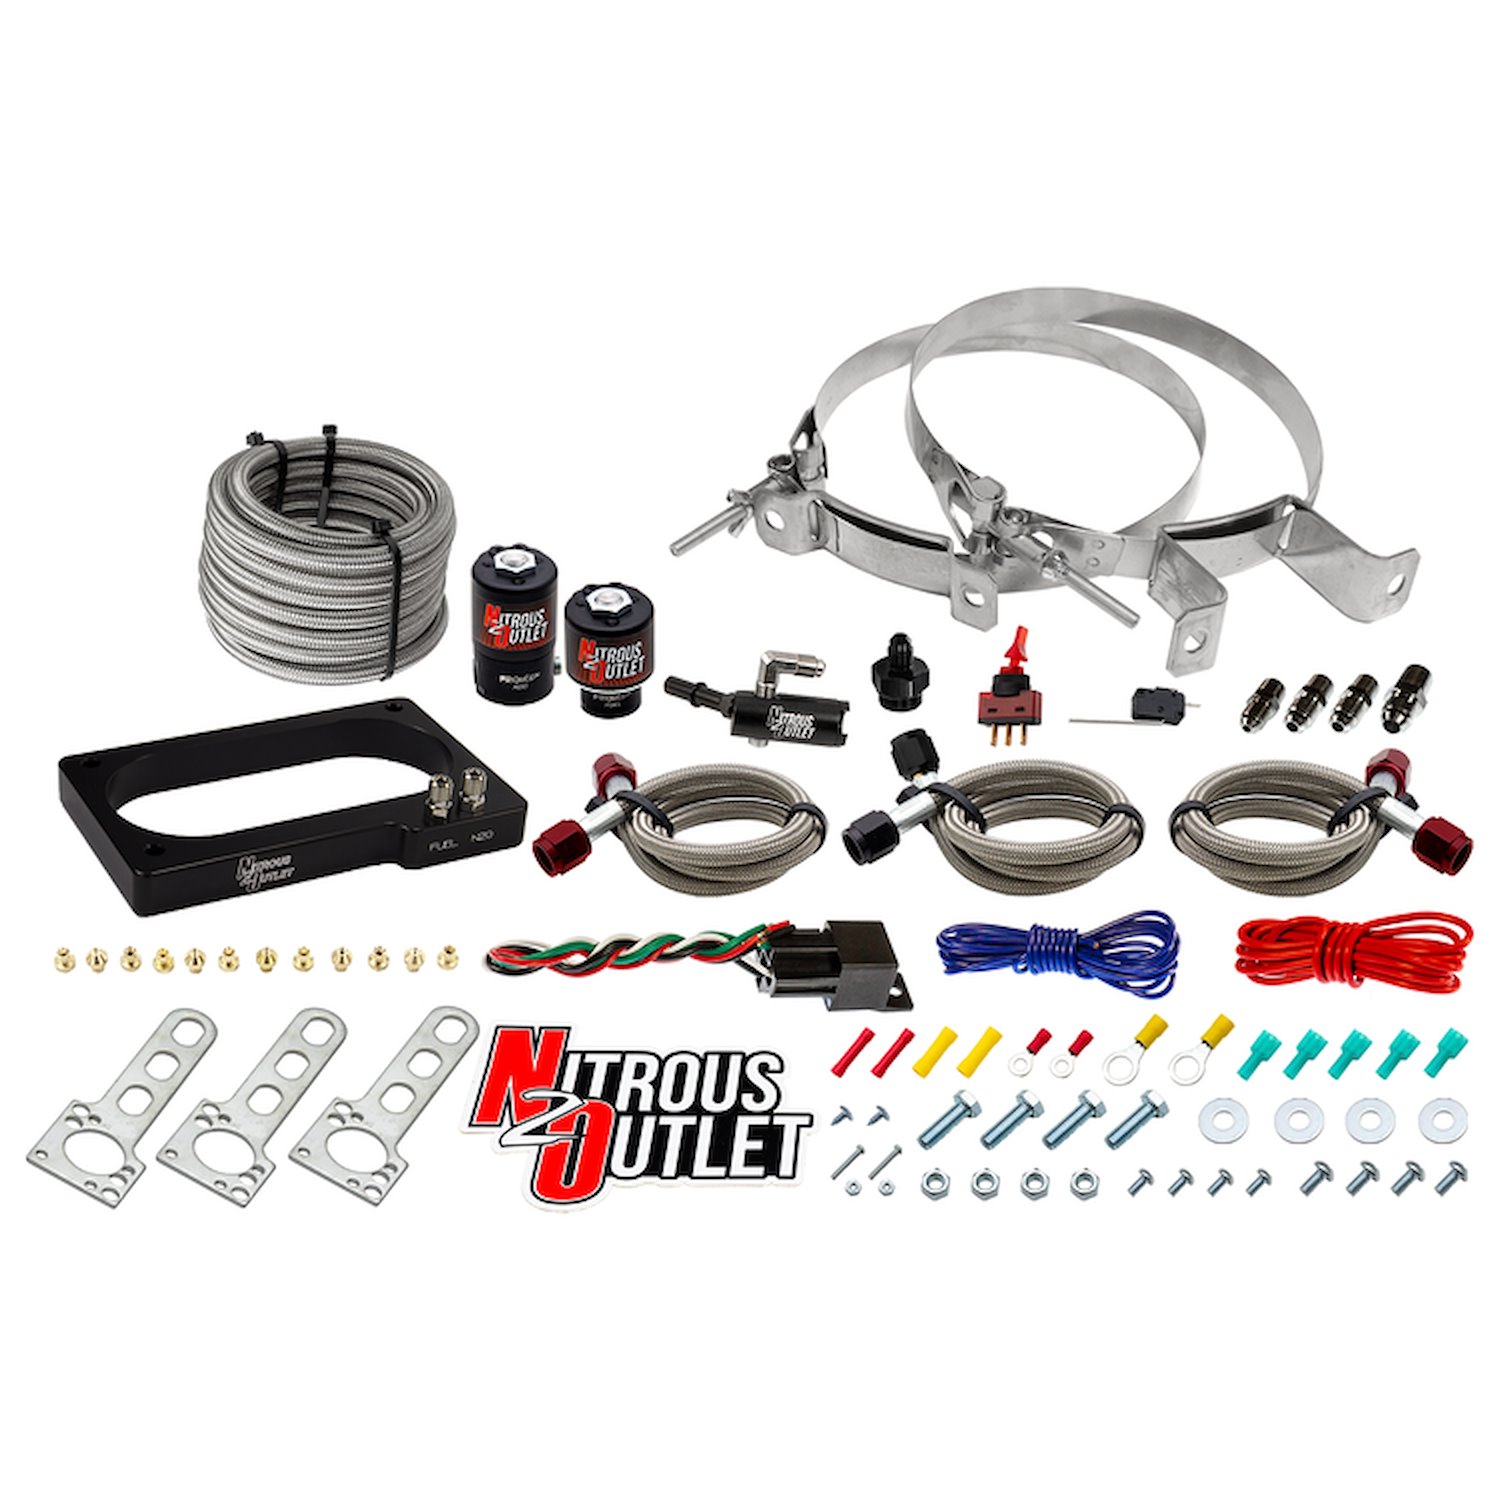 00-10152-00 Ford 2007-2014 GT 500 Mustang Plate System, Gas/E85, 5-55psi, 50-200HP, No Bottle